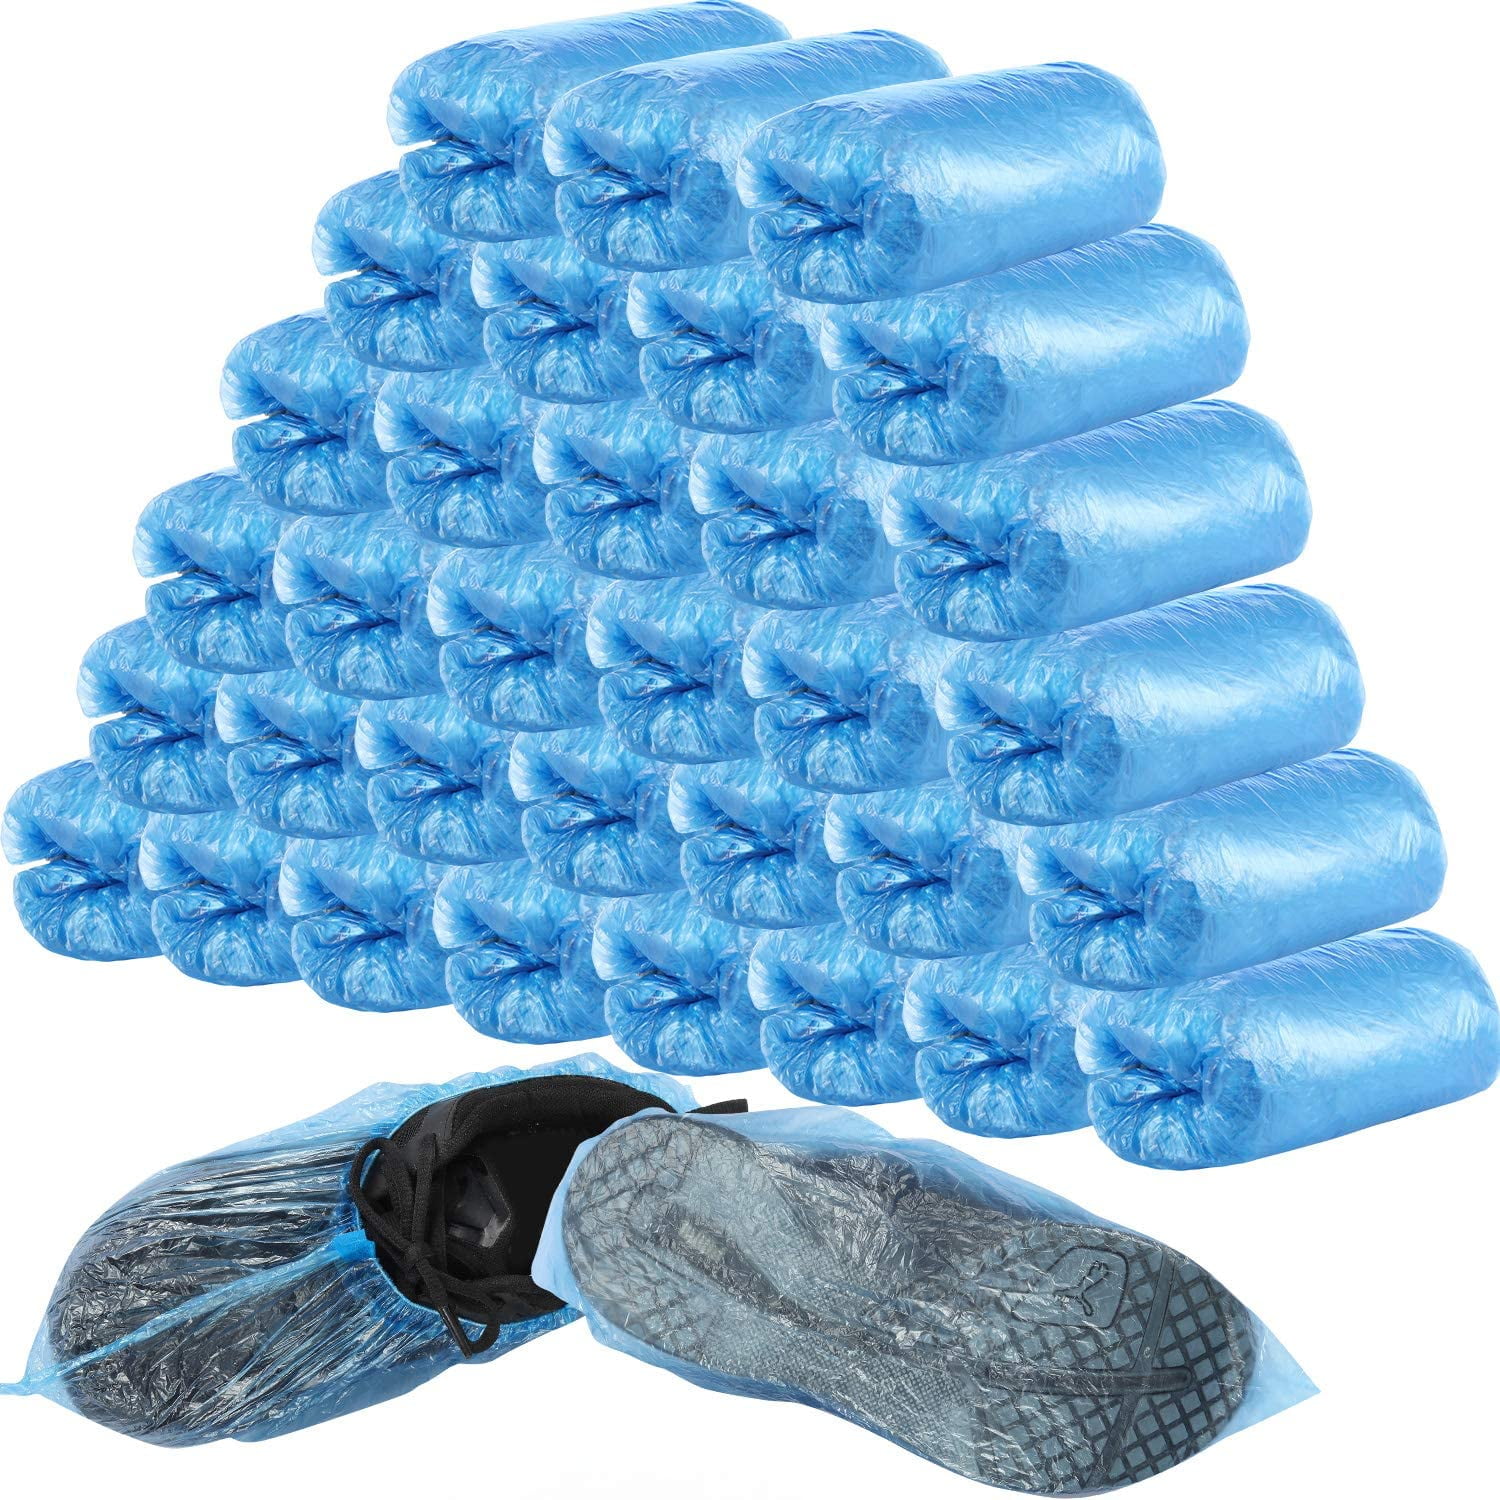 disposable shoe covers walmart canada